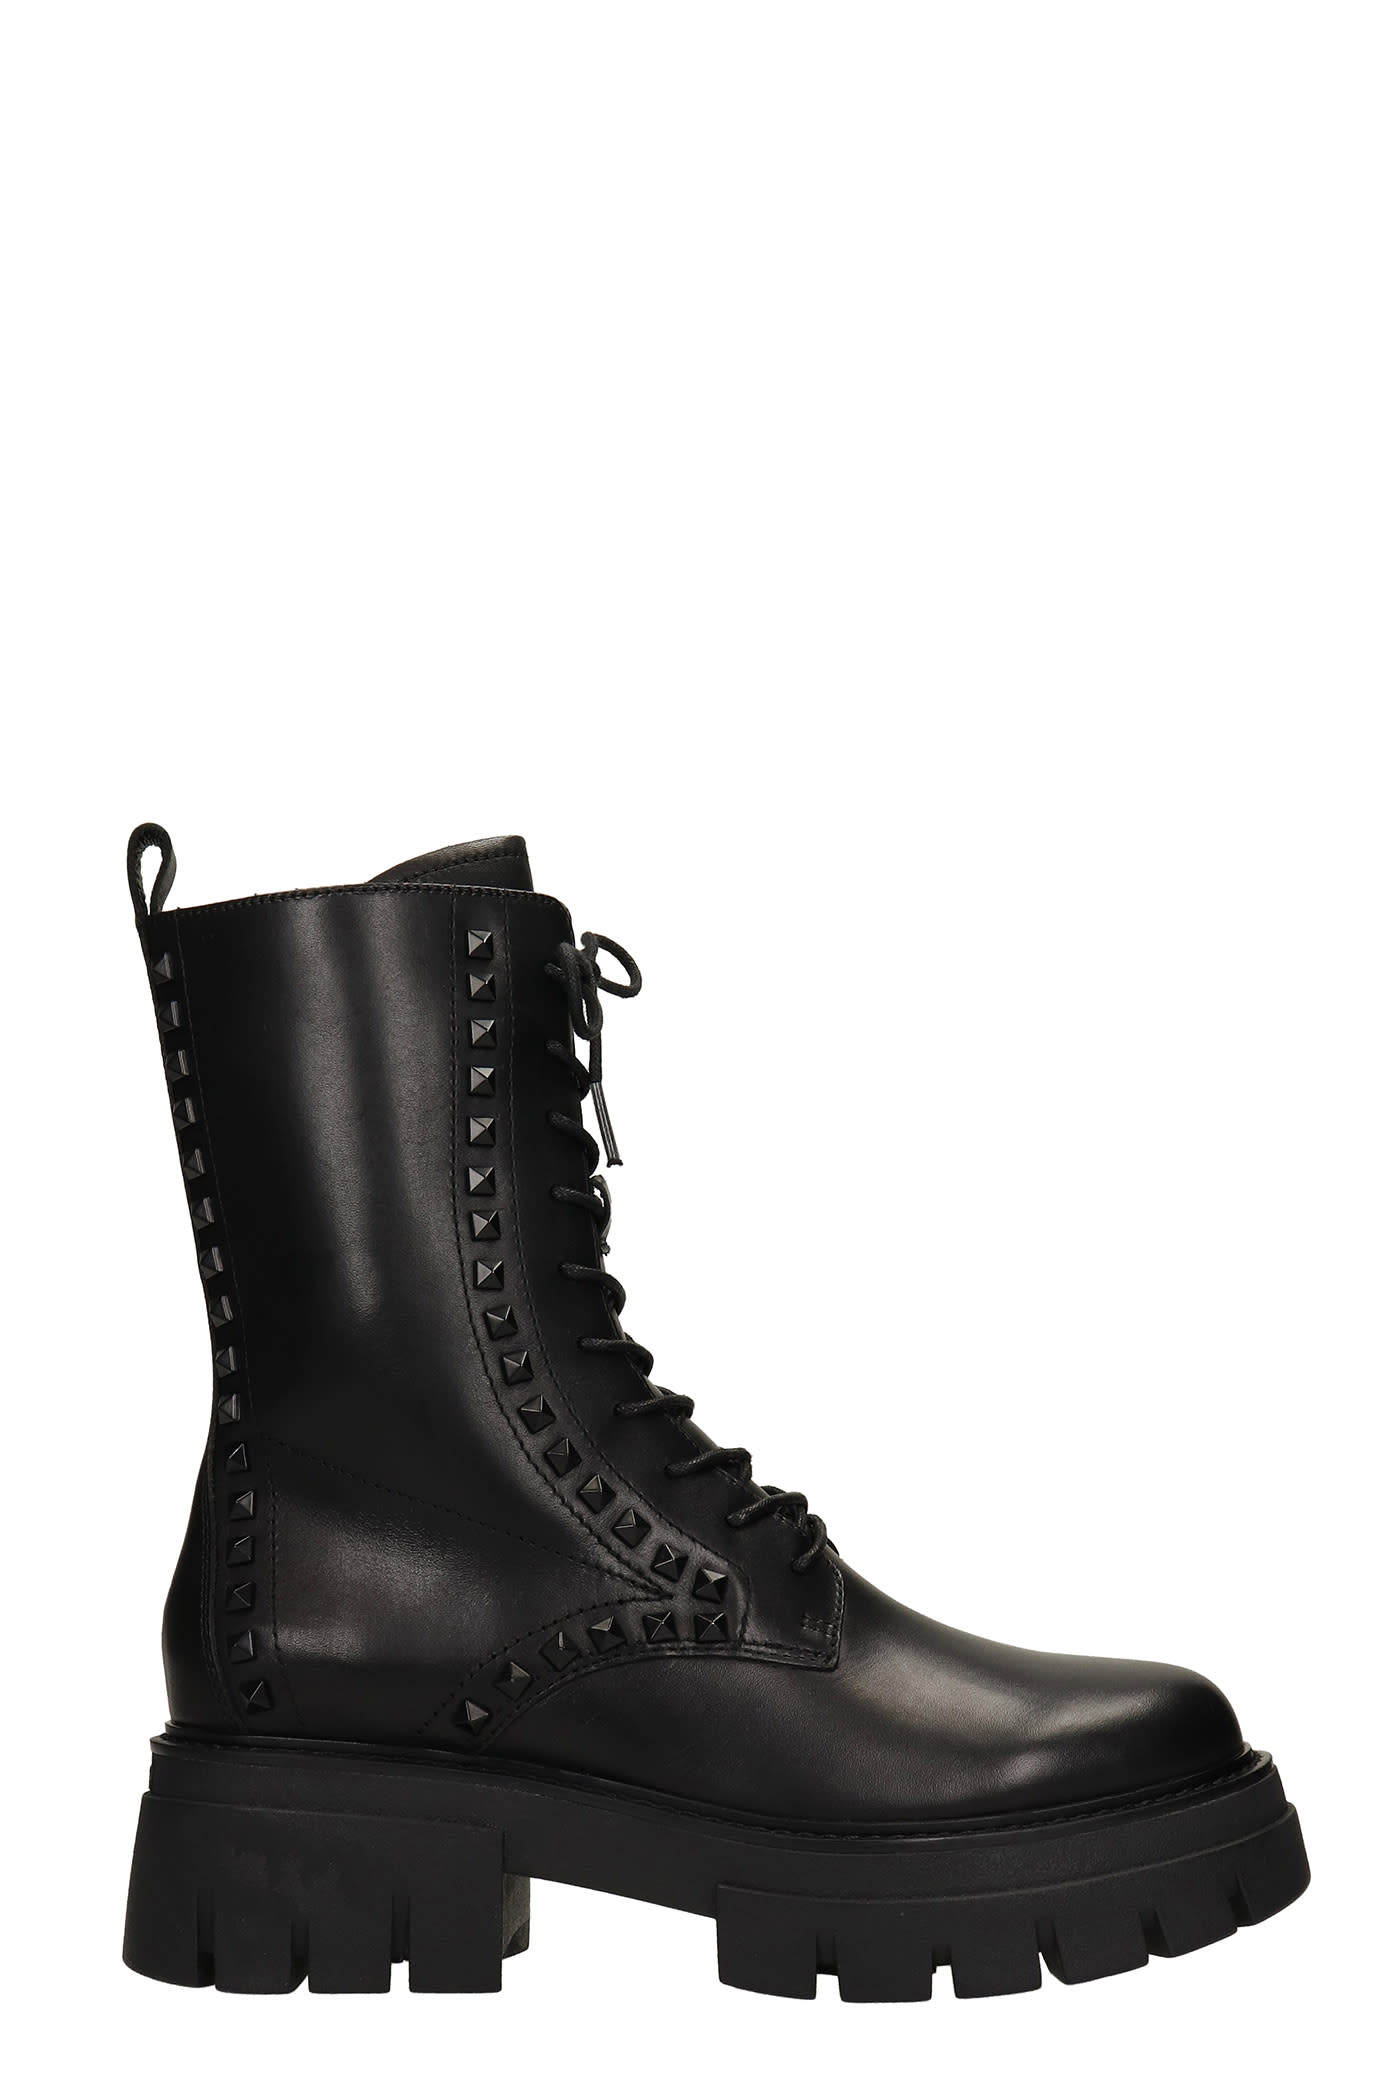 Ash Liamstuds Combat Boots In Black Leather